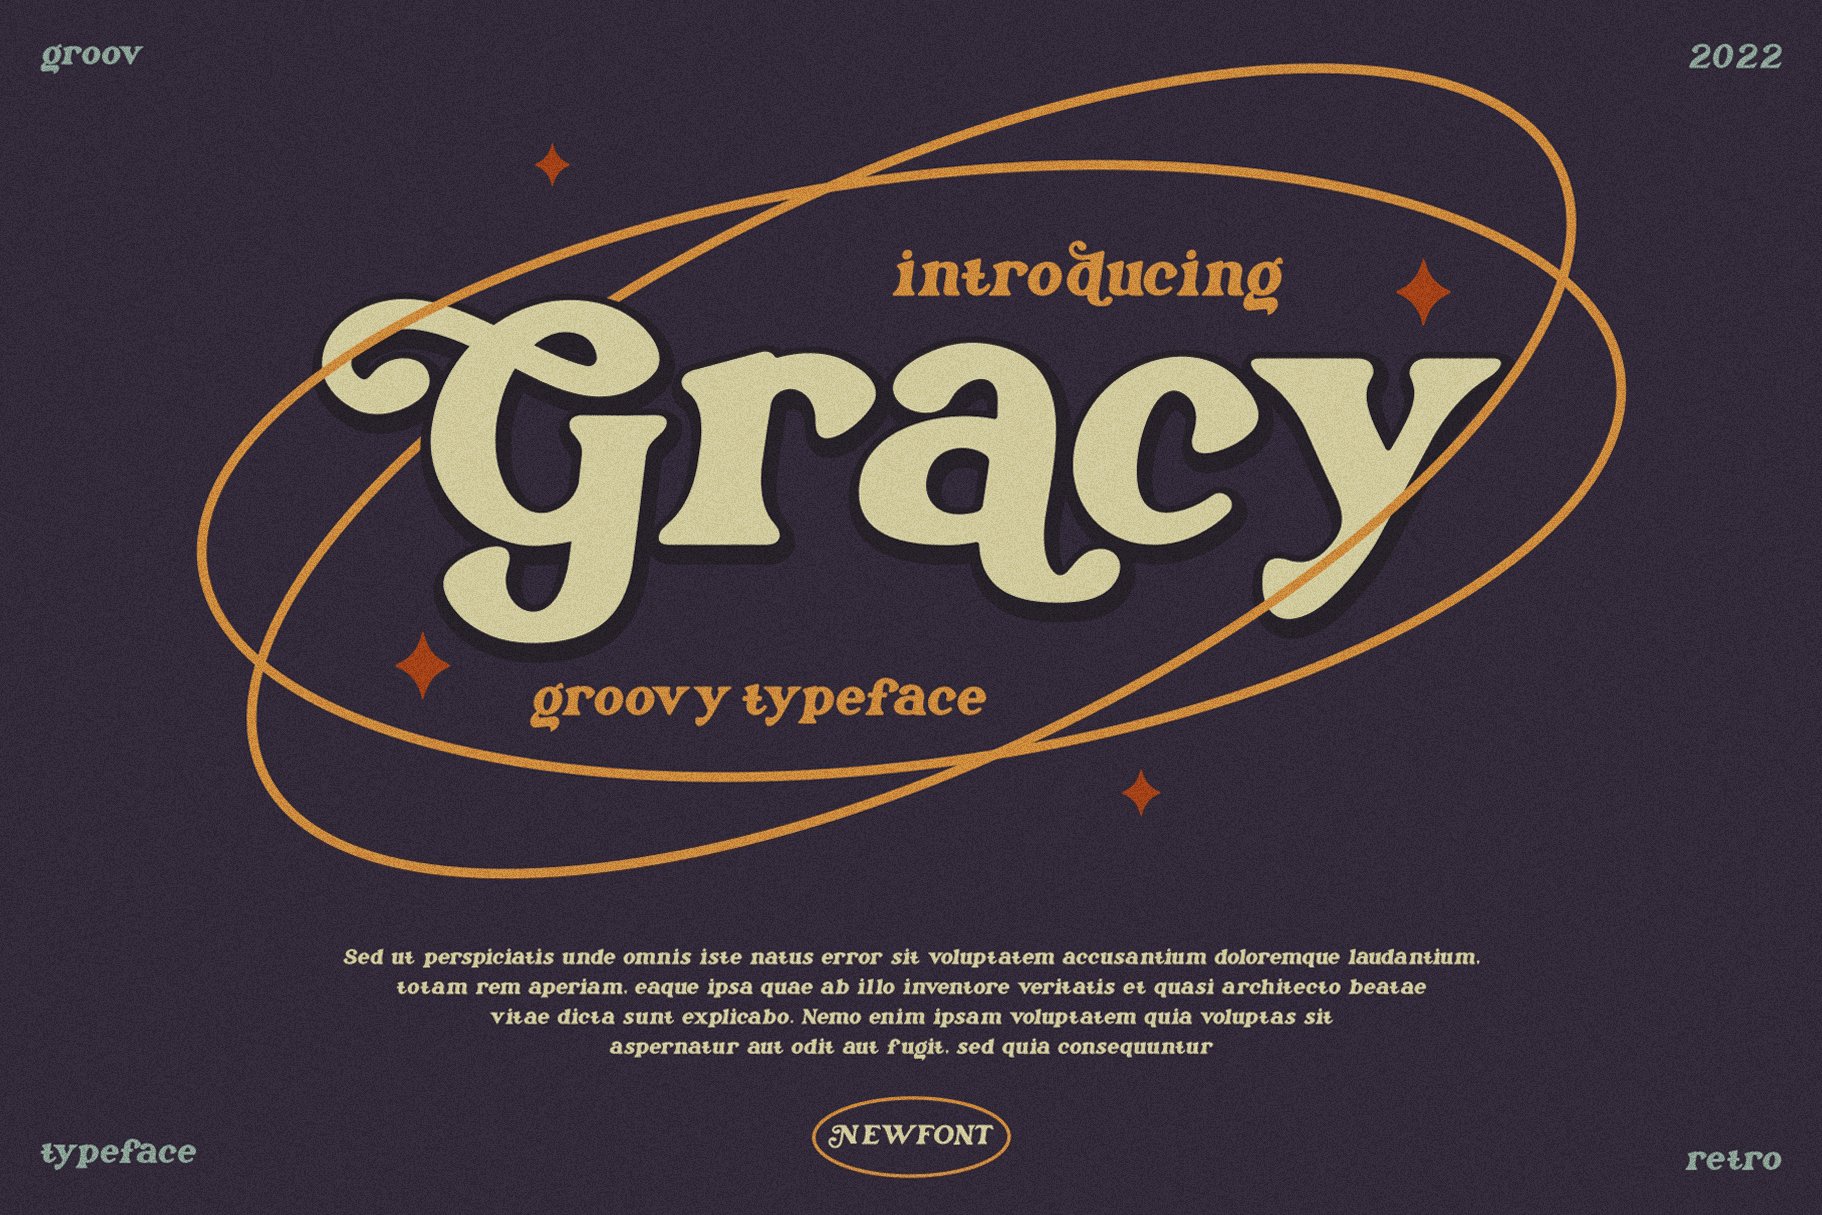 Gracy - Groovy Typeface cover image.